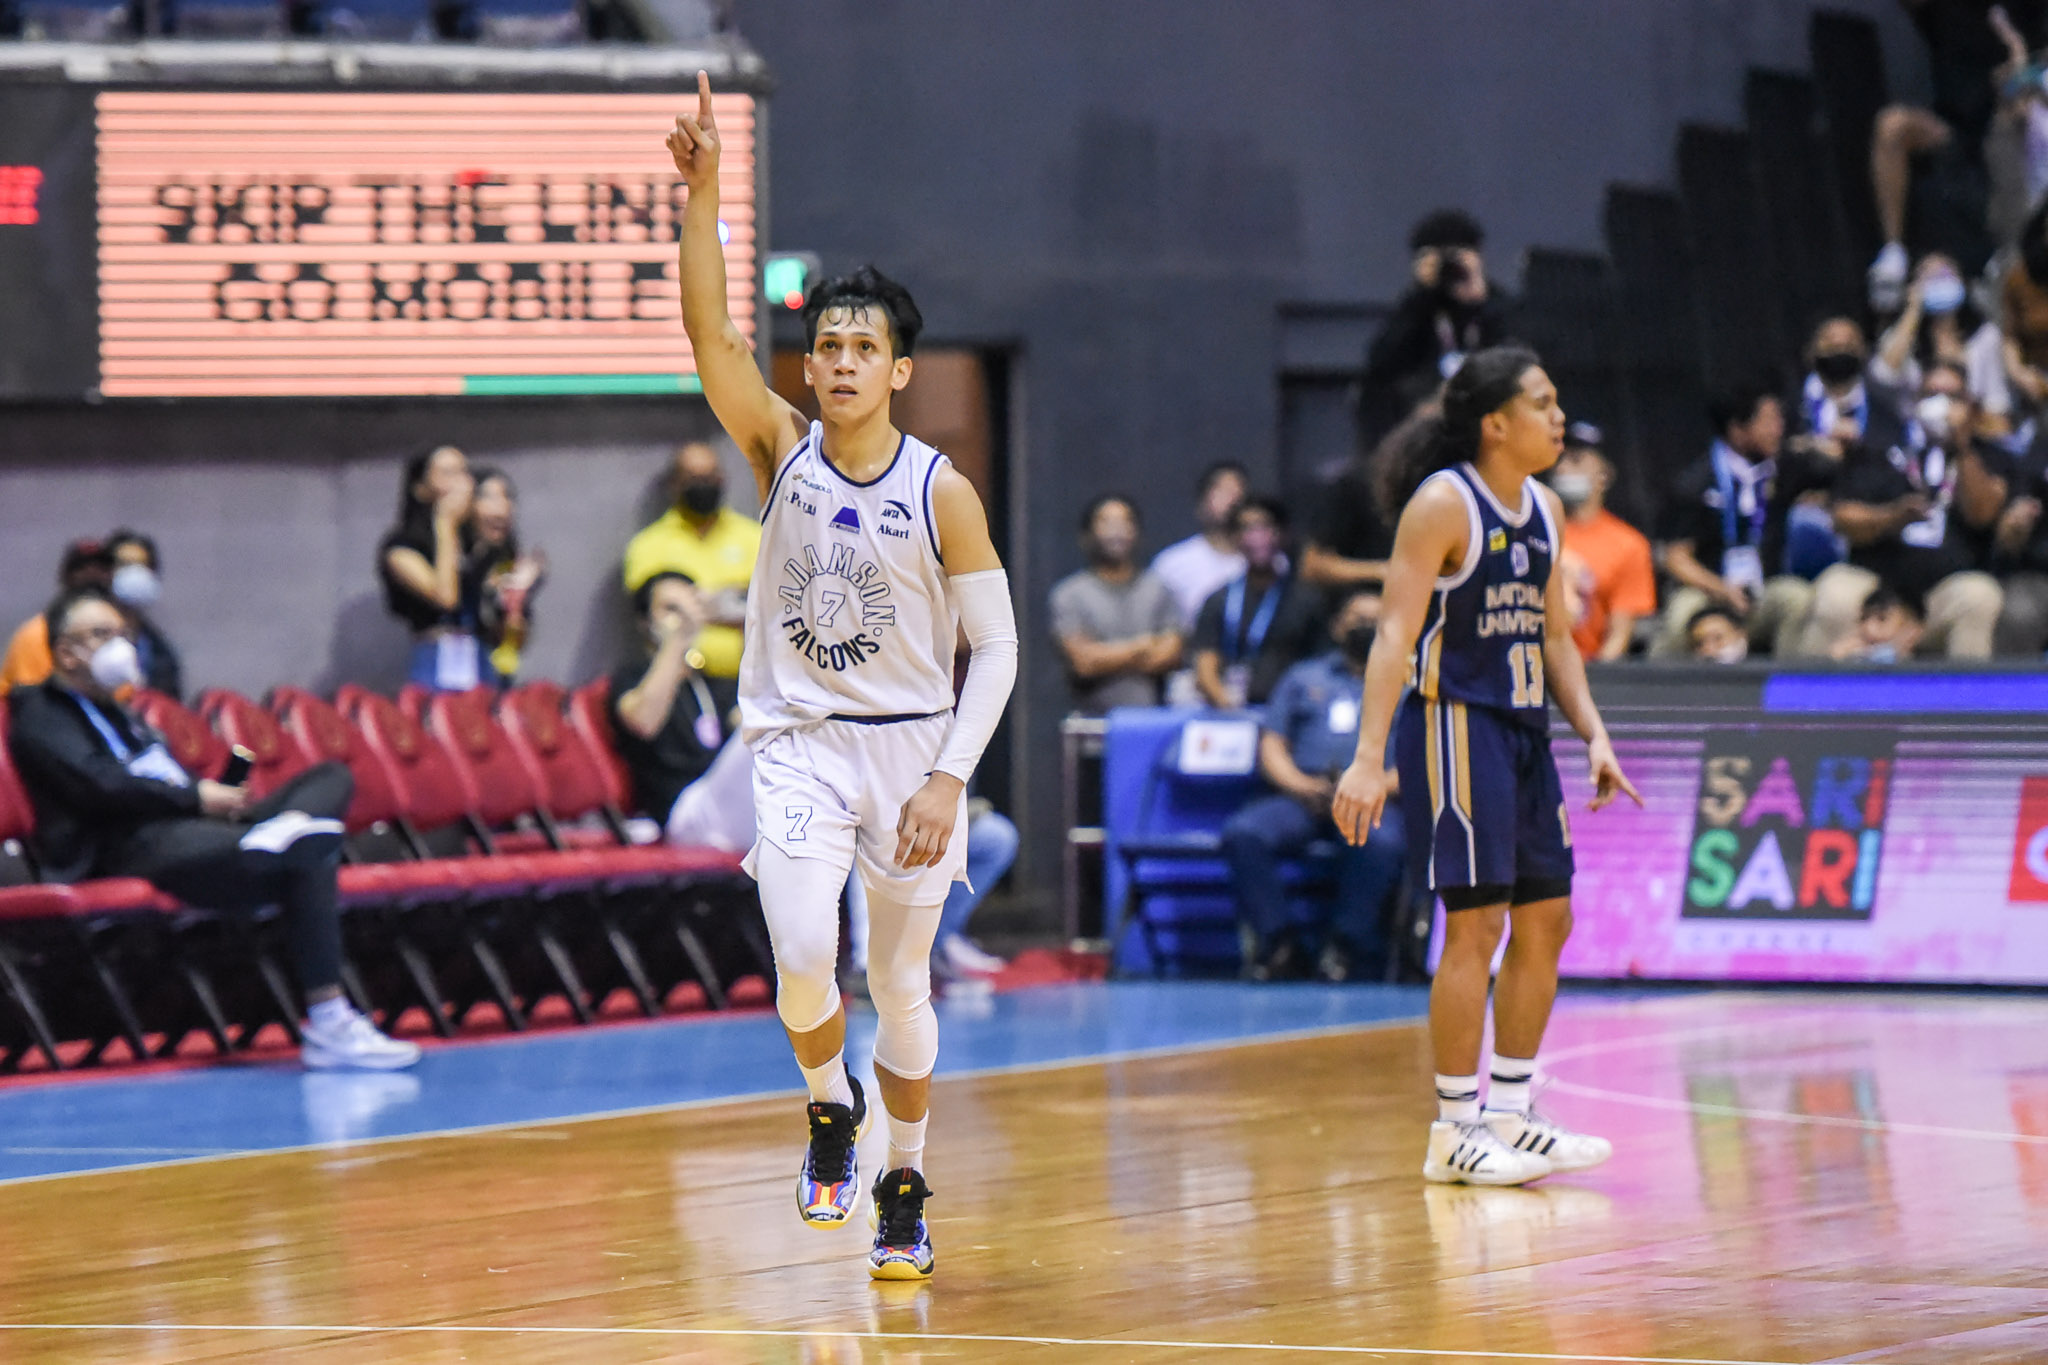 UAAP-85-MBB-NU-vs.-ADU-Jerom-Lastimosa-7514 Jerom Lastimosa had no doubt with game-winner as he practices it 'every morning, lunch, dinner' AdU Basketball News UAAP  - philippine sports news